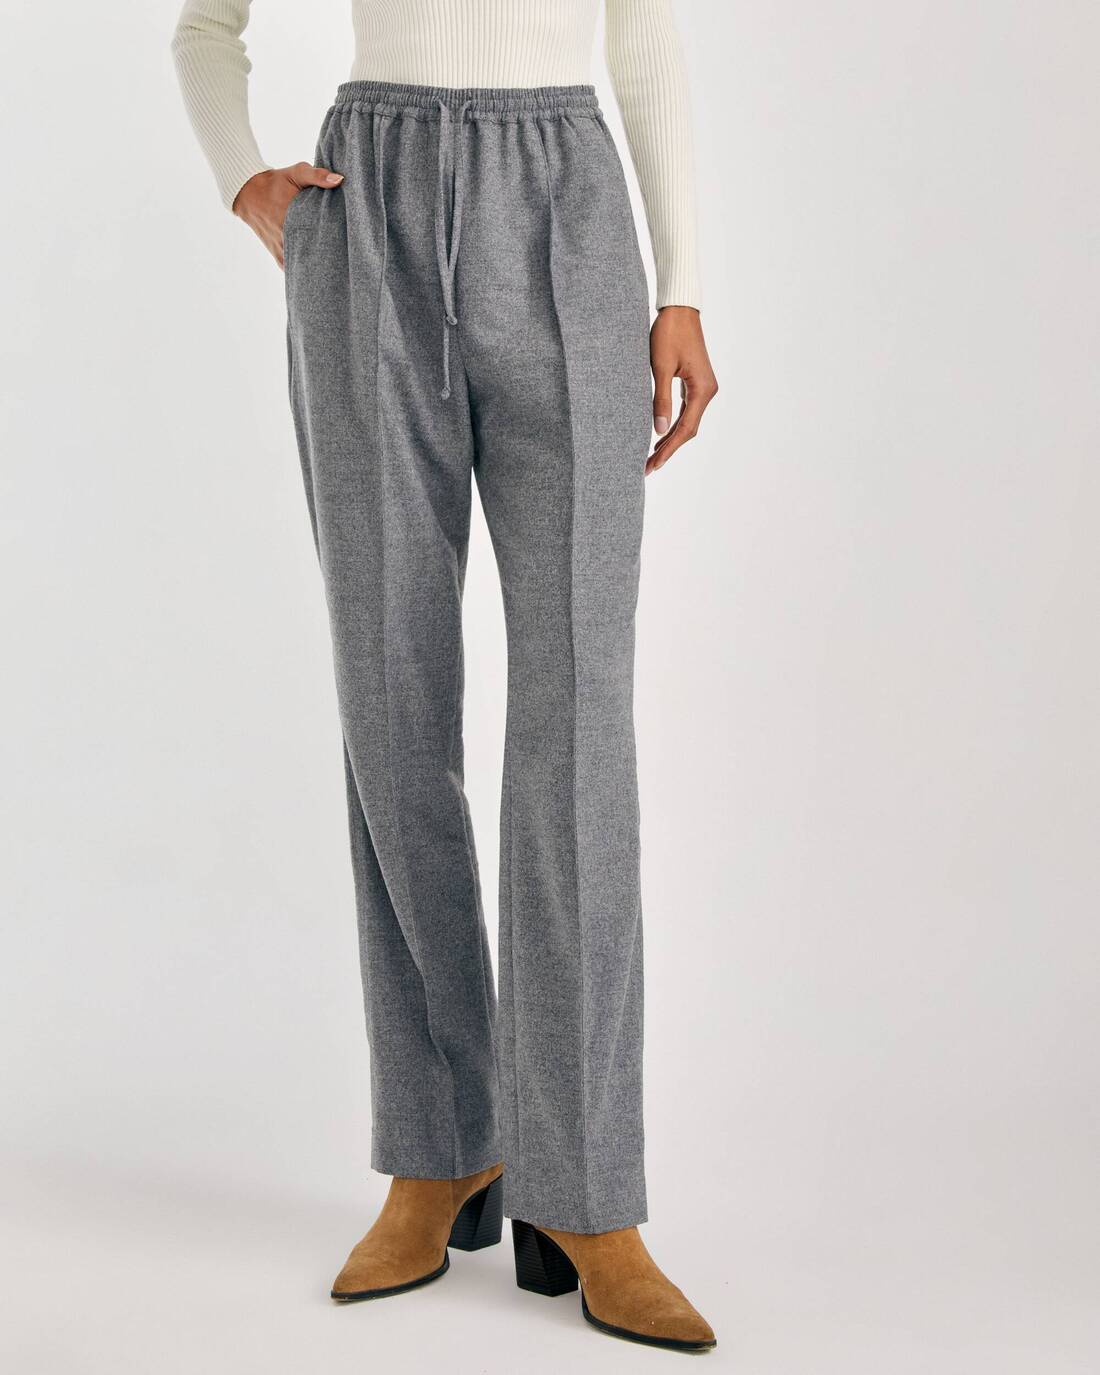 Comfortable wool trousers